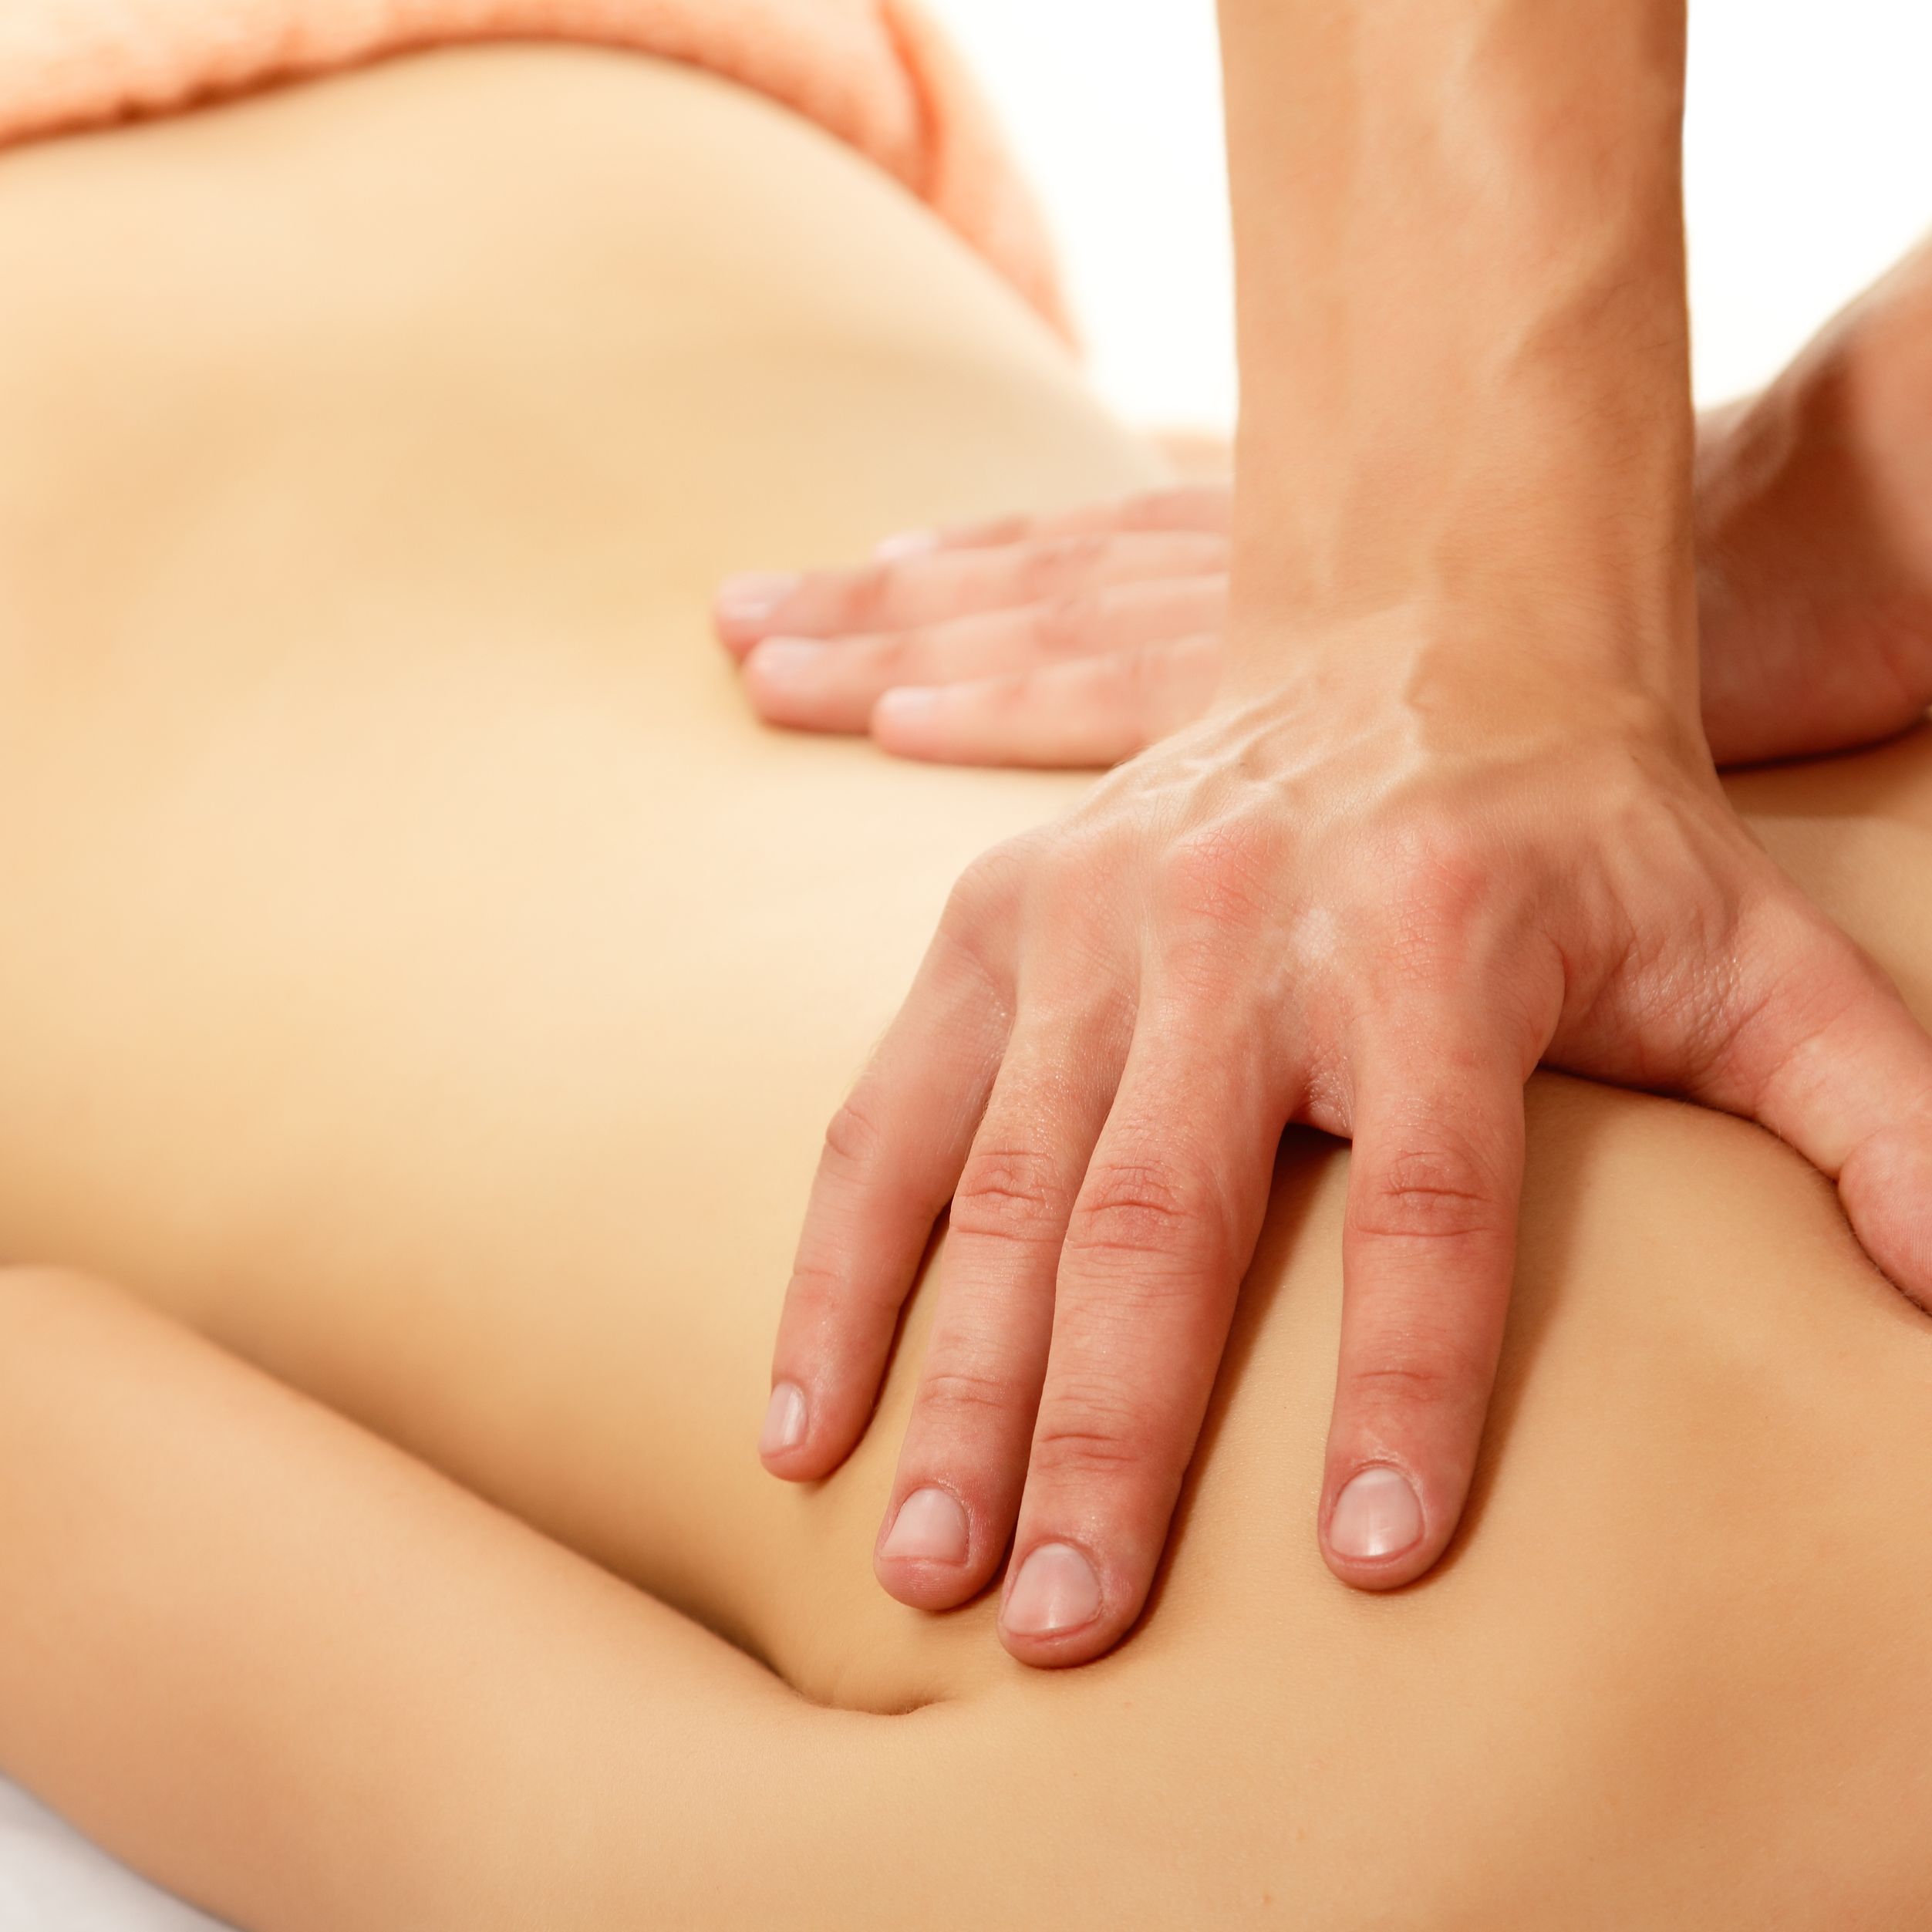 The Classical - ENOCH Massage Clinic - Zurich and Uster